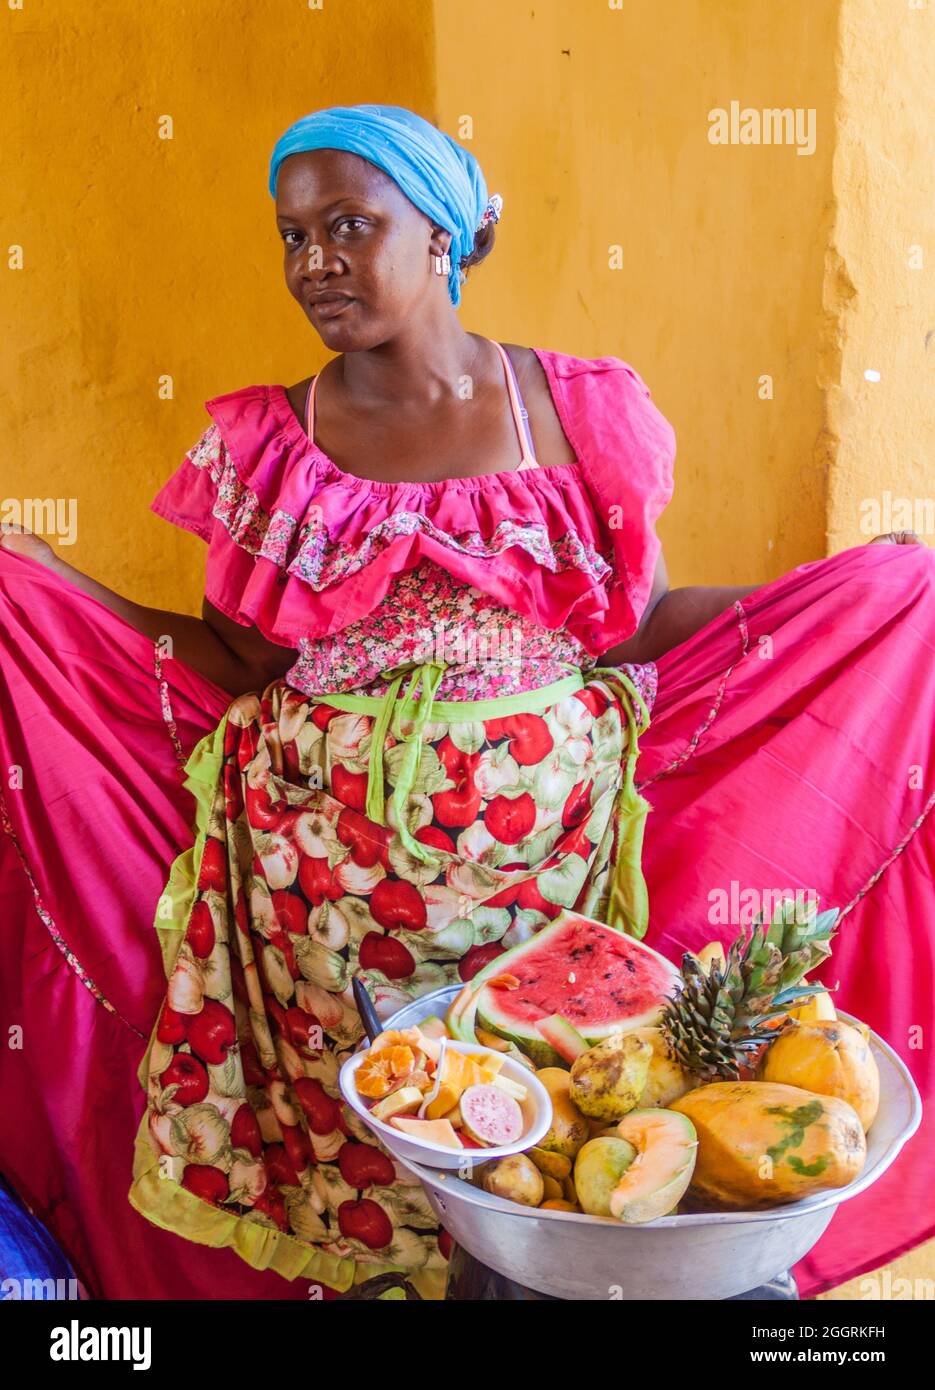 CARTAGENA DE INDIAS, COLOMBIA - AUG 28, 2015: Woman wearing traditional costume sells fruits in the center of Cartagena. Stock Photo